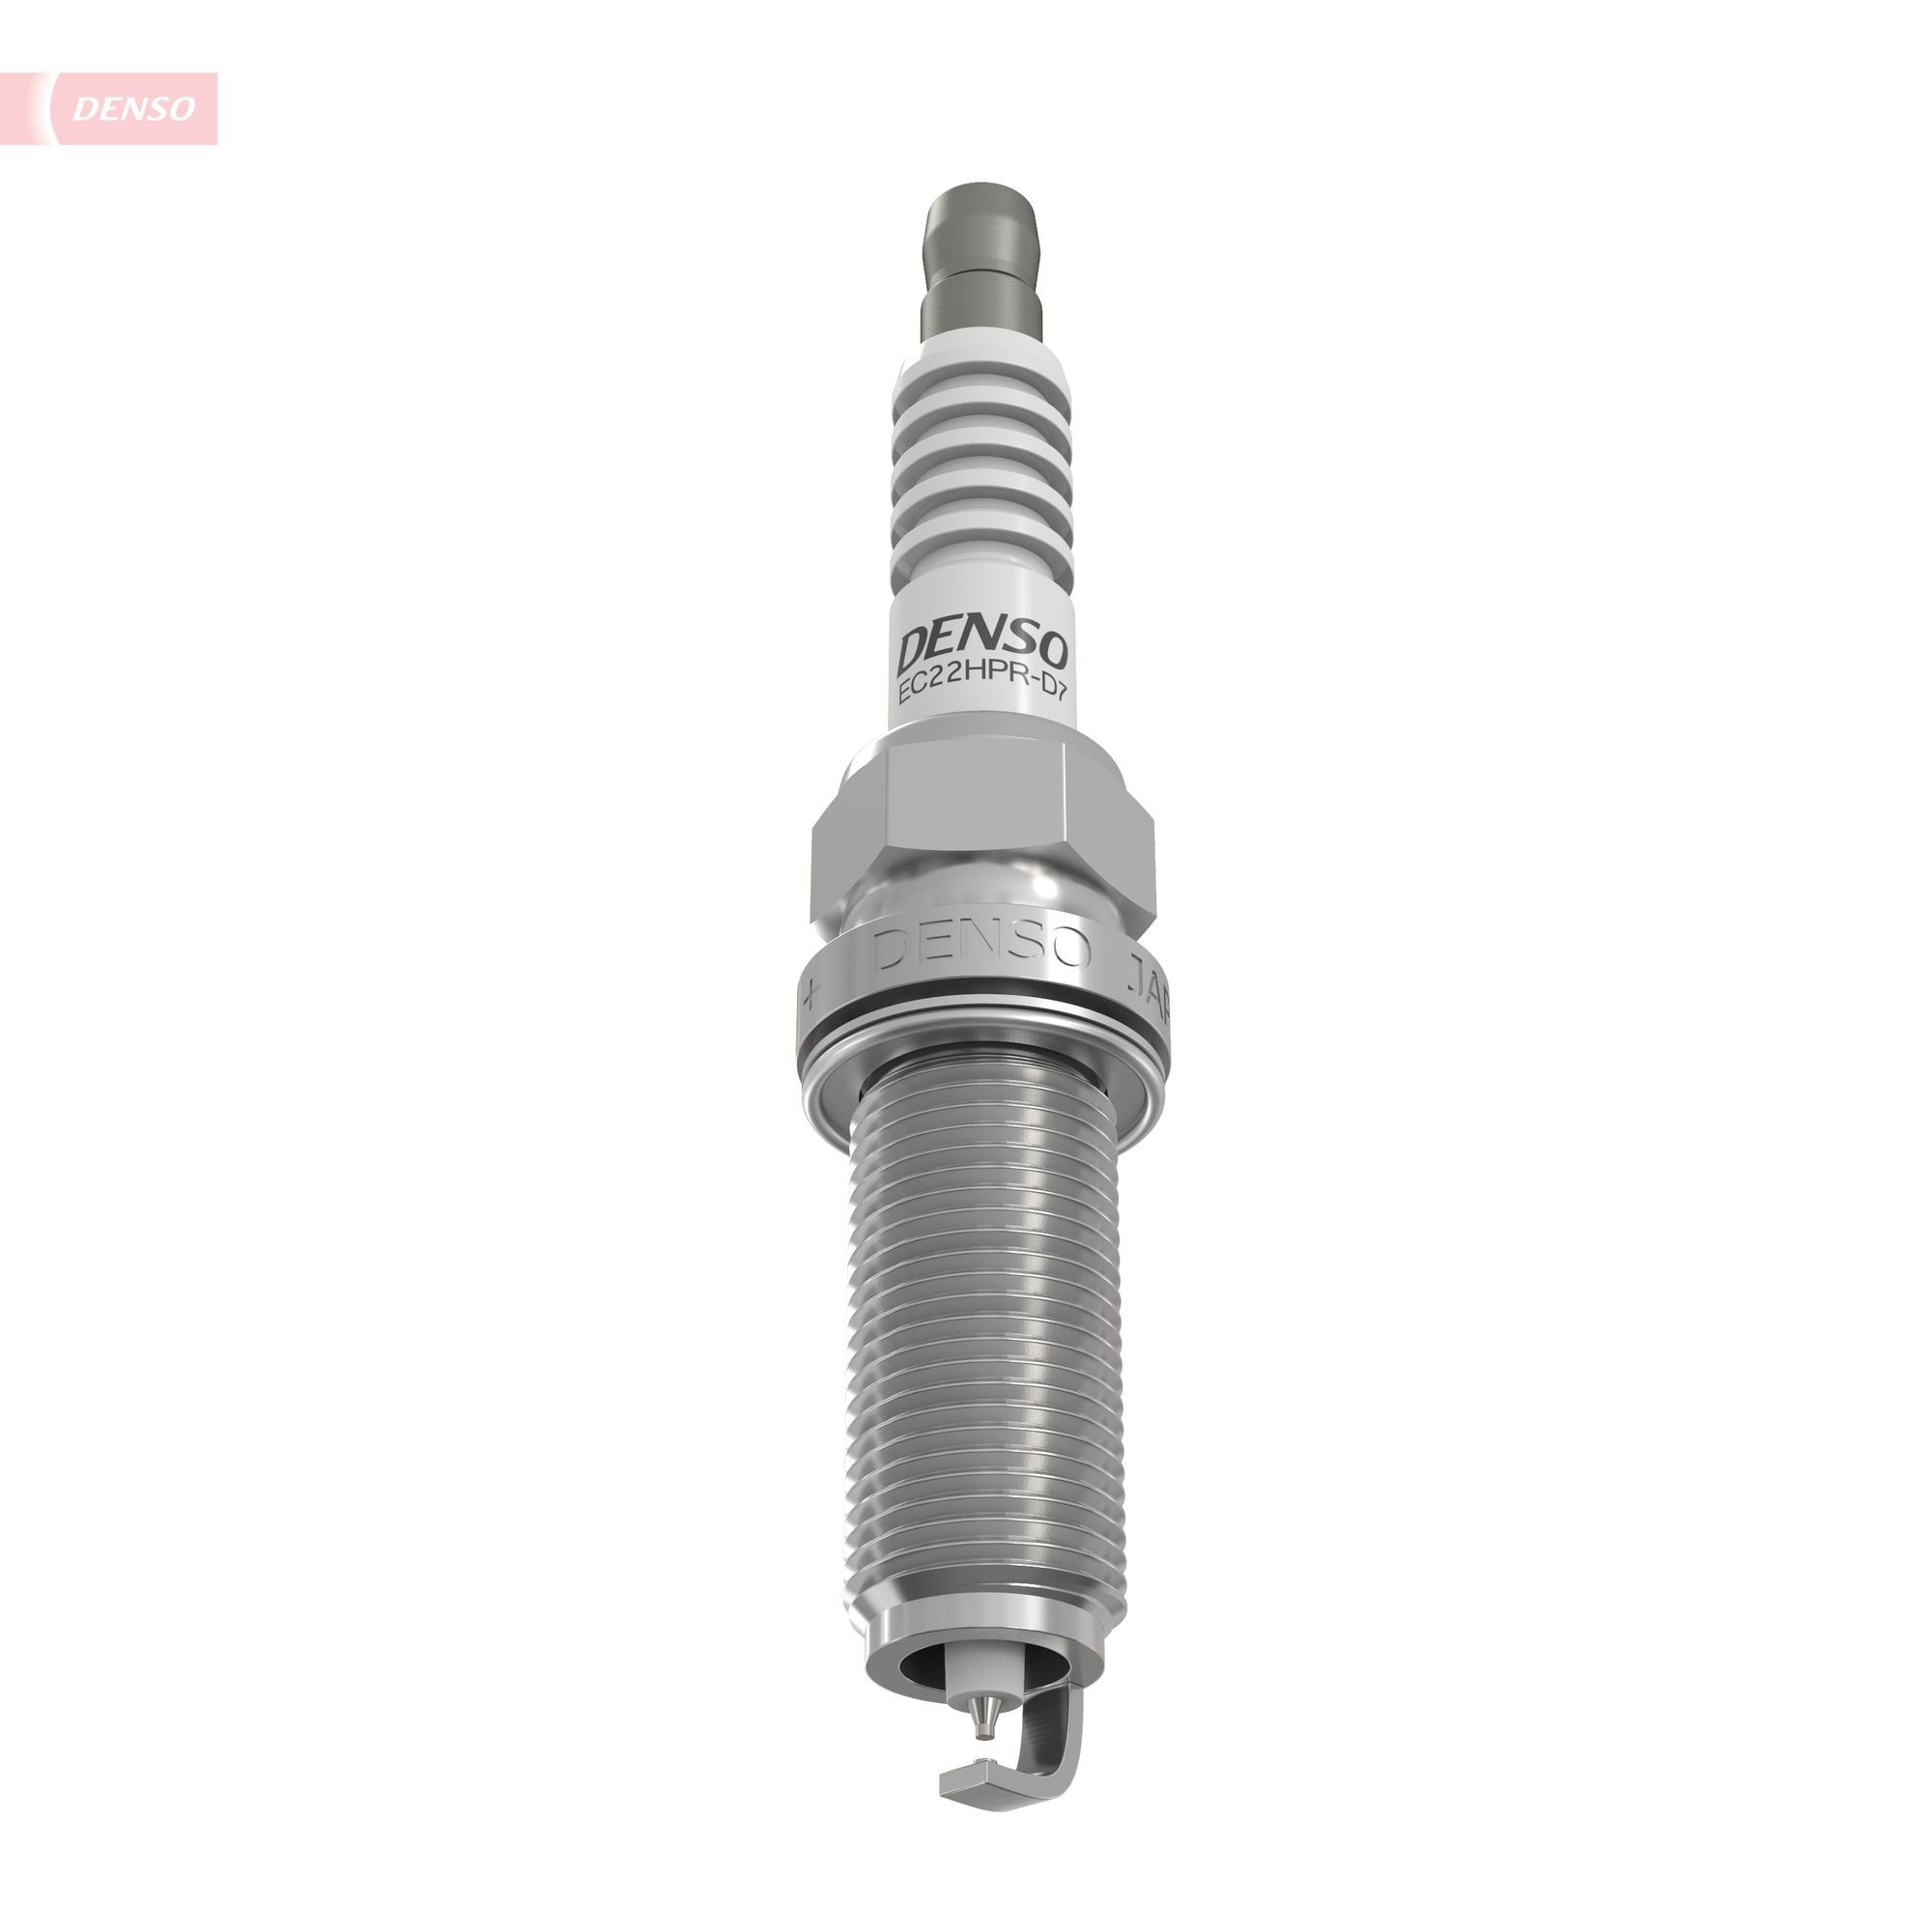 DENSO Spark plugs 3523 buy online